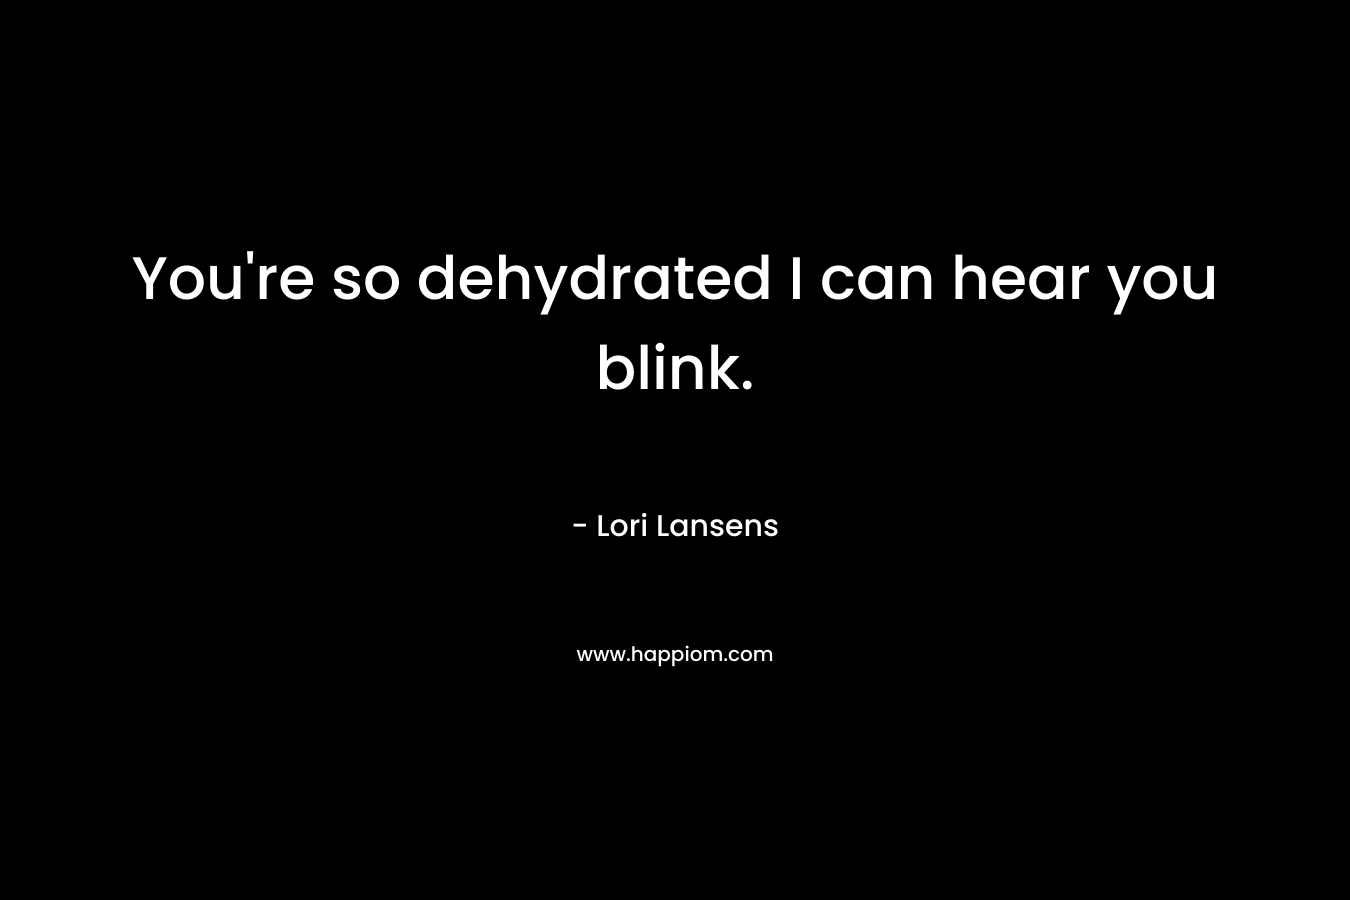 You're so dehydrated I can hear you blink.